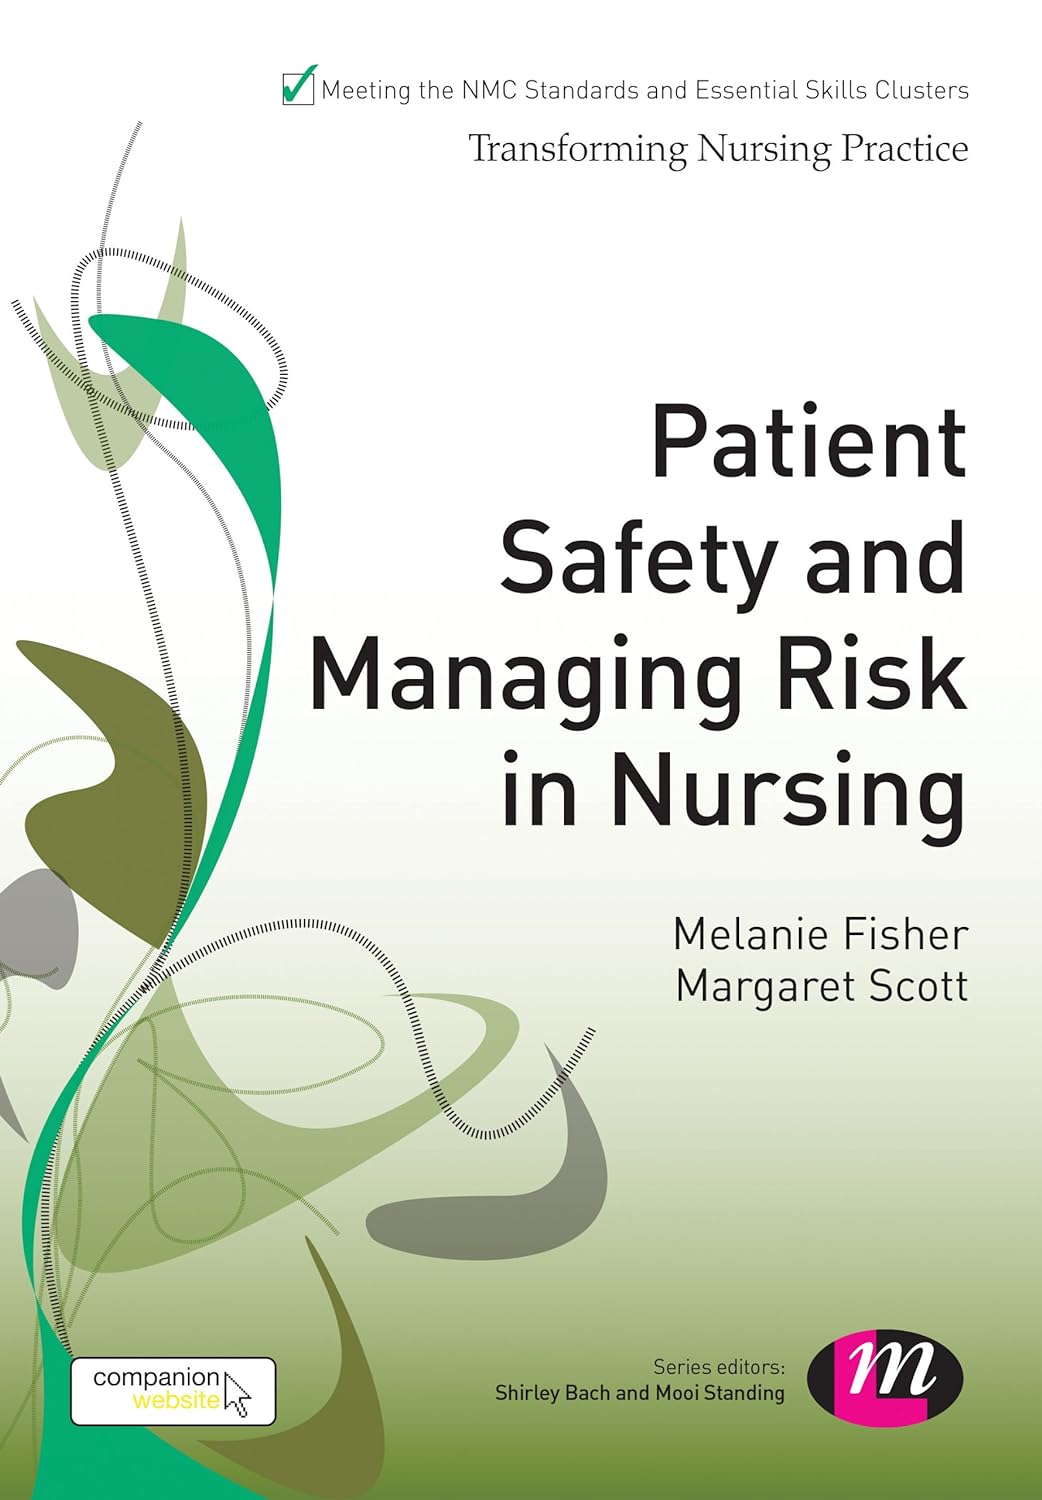 Patient Safety and Managing Risk in Nursing (Transforming Nursing Practice Series)  by Melanie Fisher 